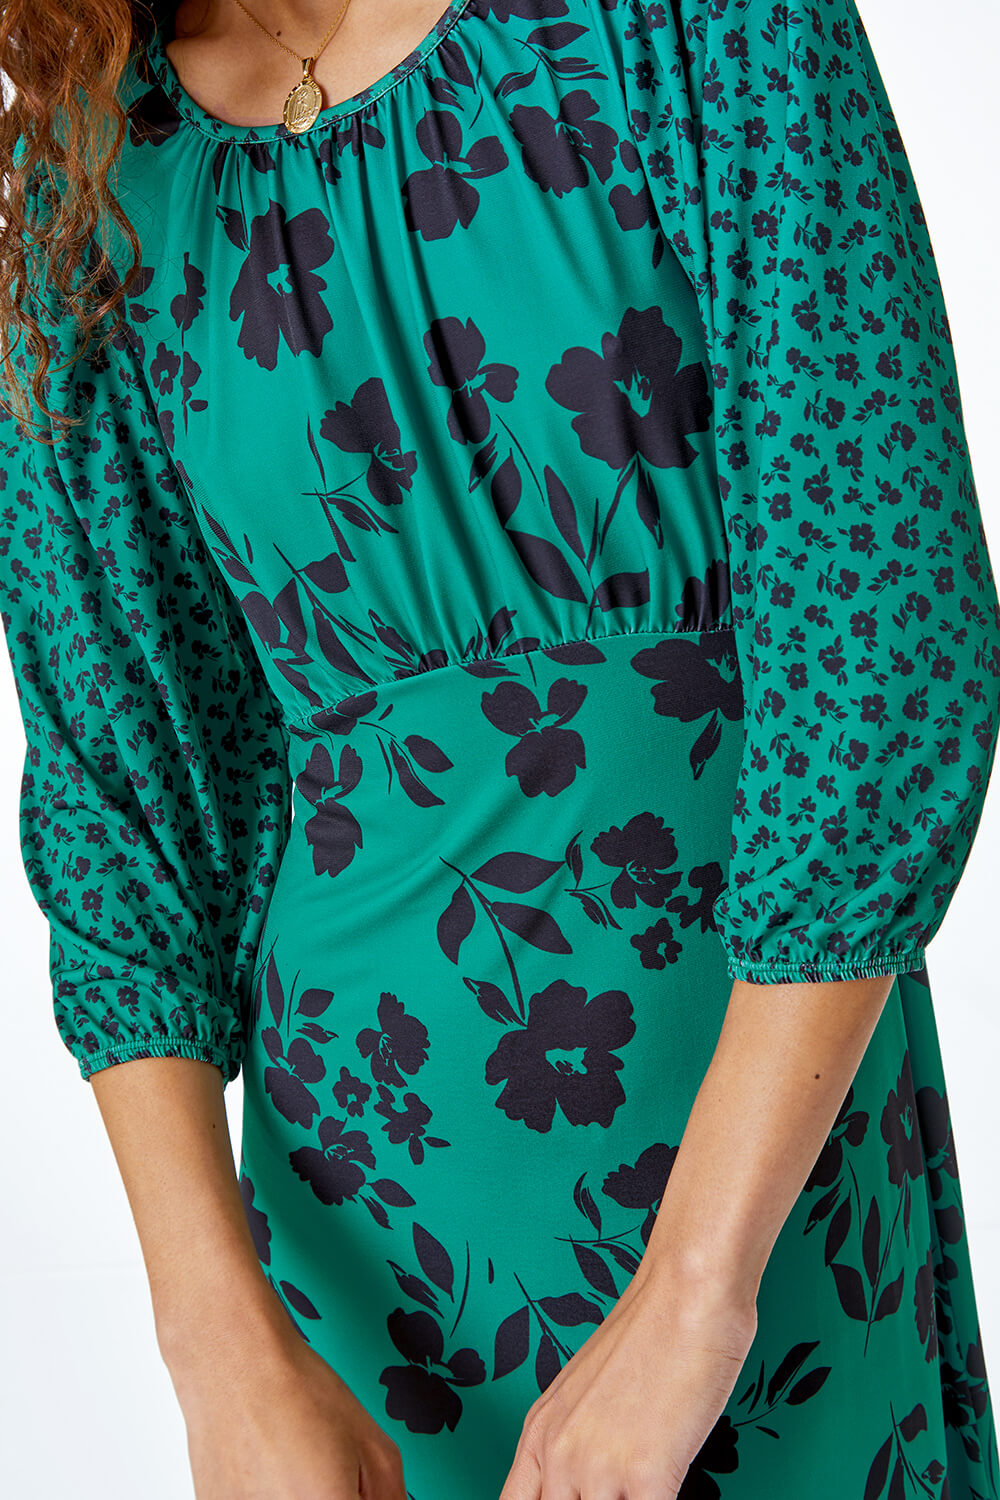 Green Floral Contrast Print Midi Dress, Image 5 of 5